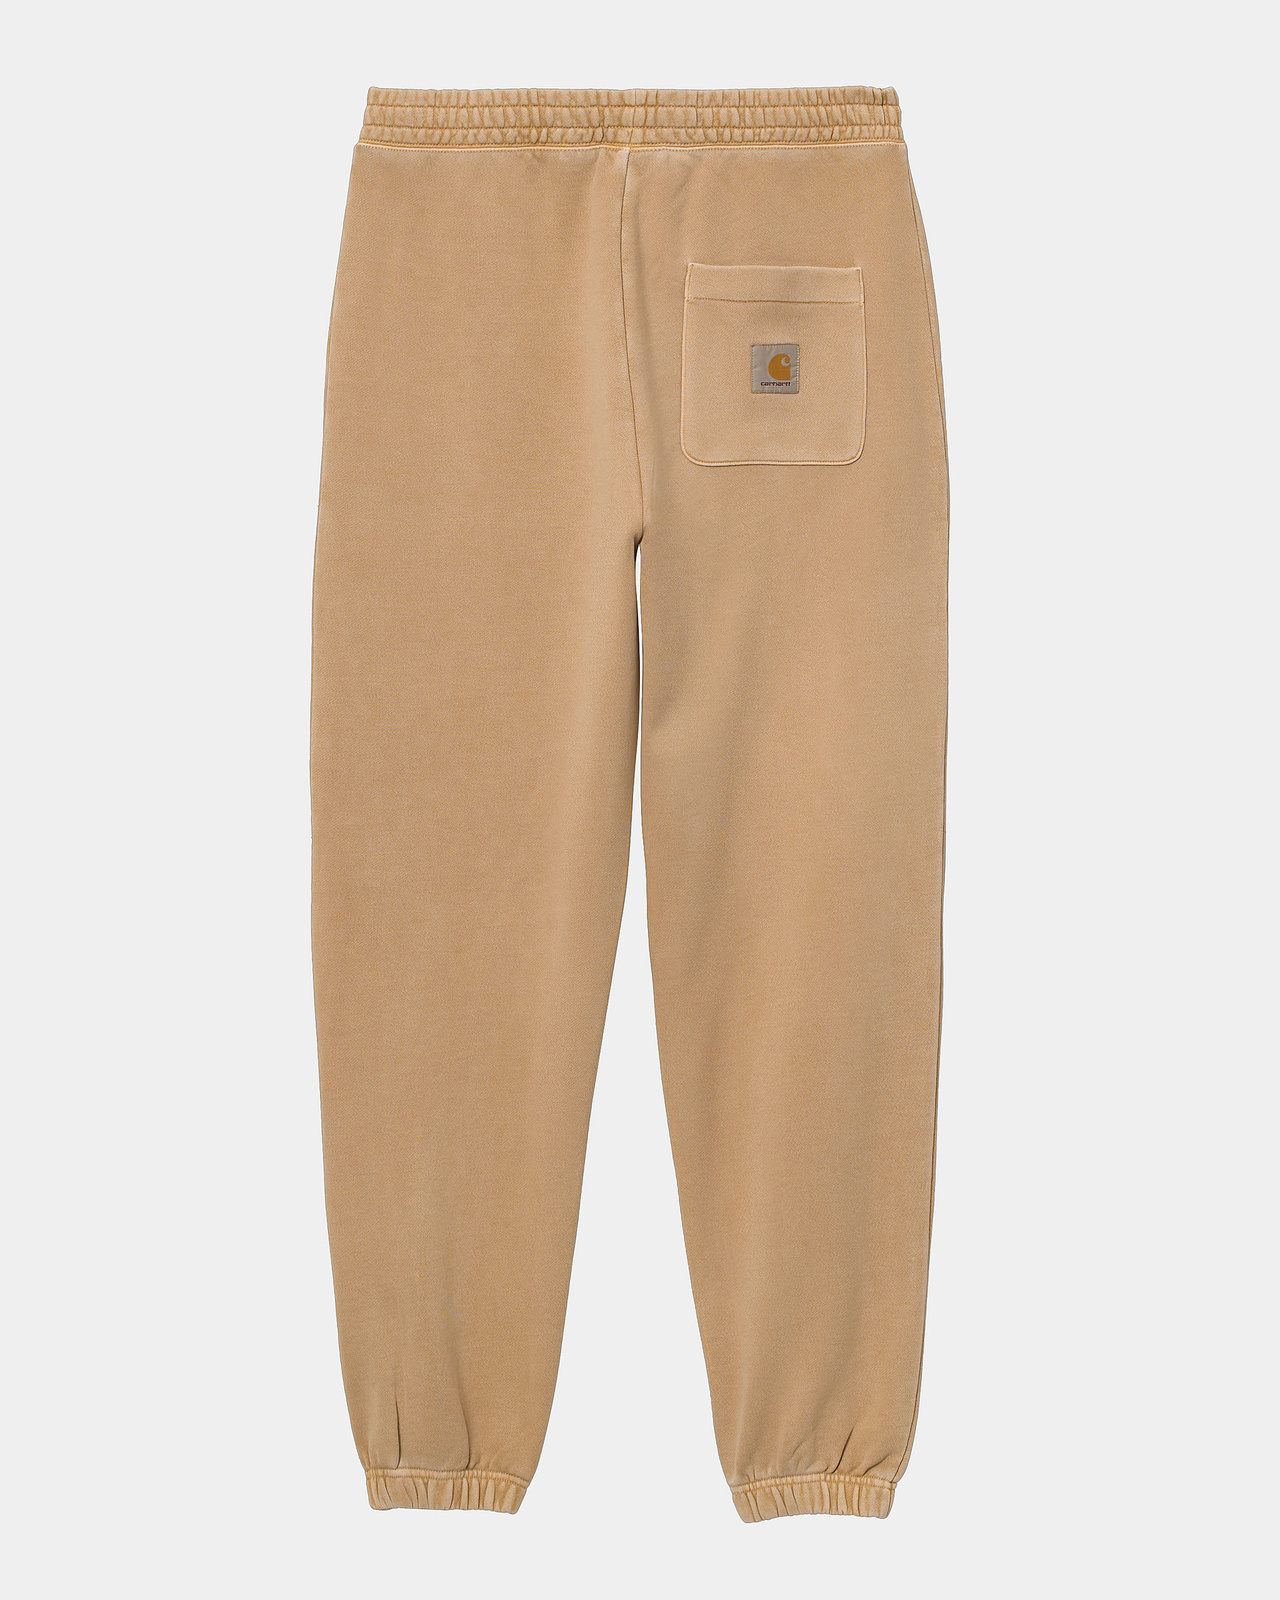 Nelson Sweat Pant - Dusty H Brown - S